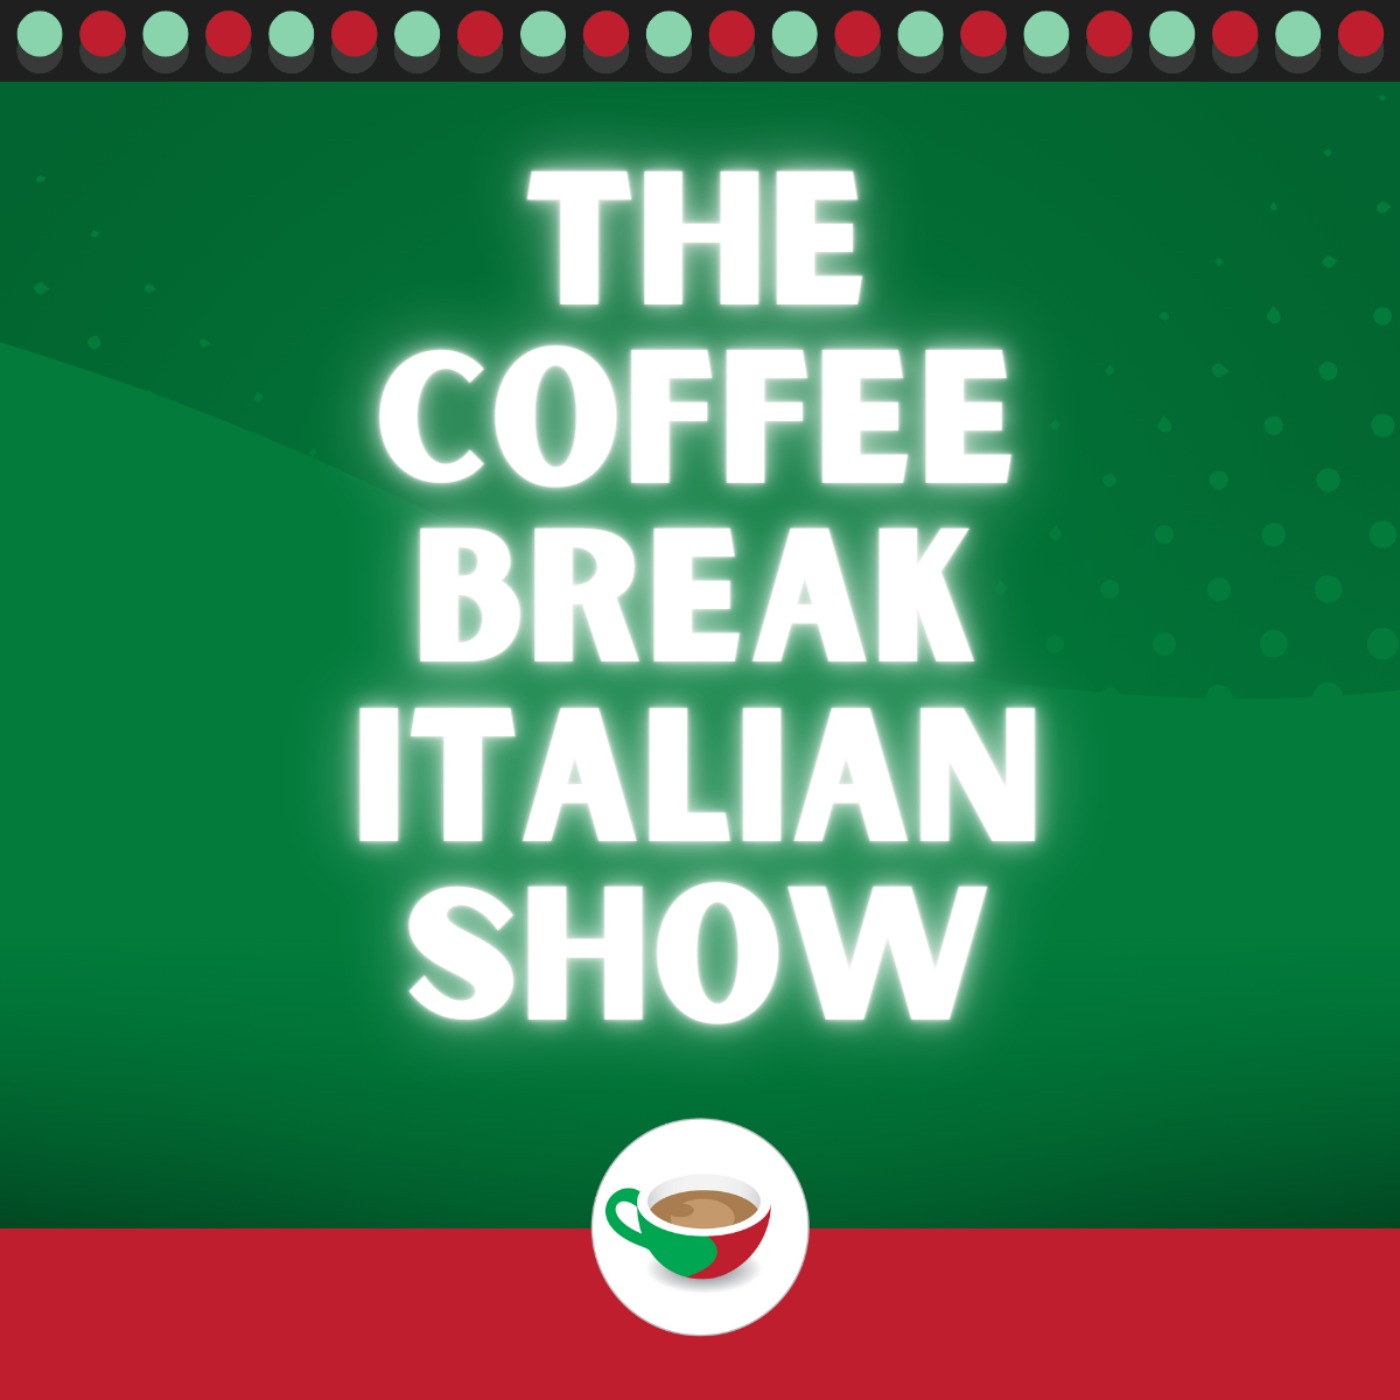 Practising ’avere’ expressions - Part 2 | The Coffee Break Italian Show 1.06